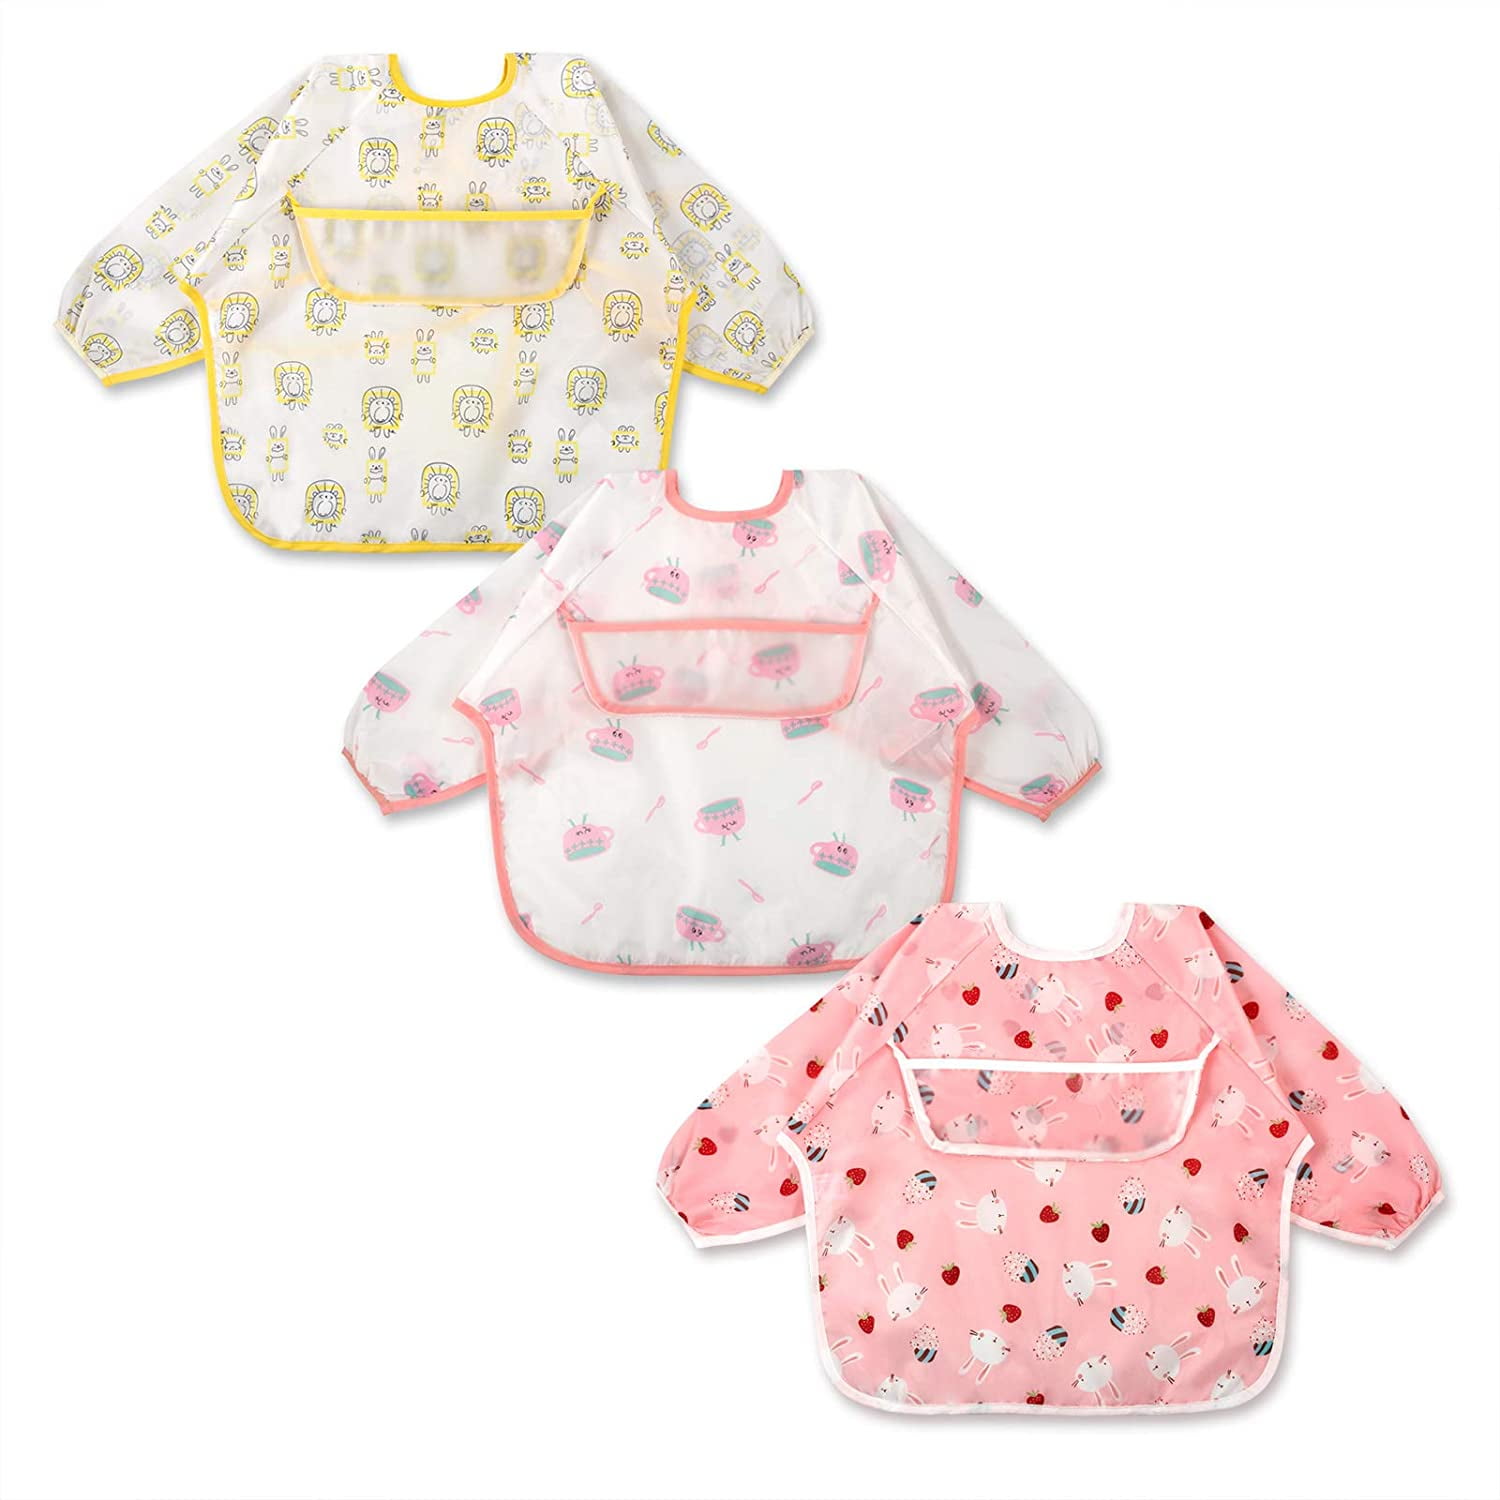 6-24 Months Stain and Odor Resistance Play Smock Apron Toddler Bib with Sleeves and Crumb Catcher 3 Pcs Long Sleeved Bib Set Pack of 3 Baby Waterproof Bibs with Pocket Bundle 